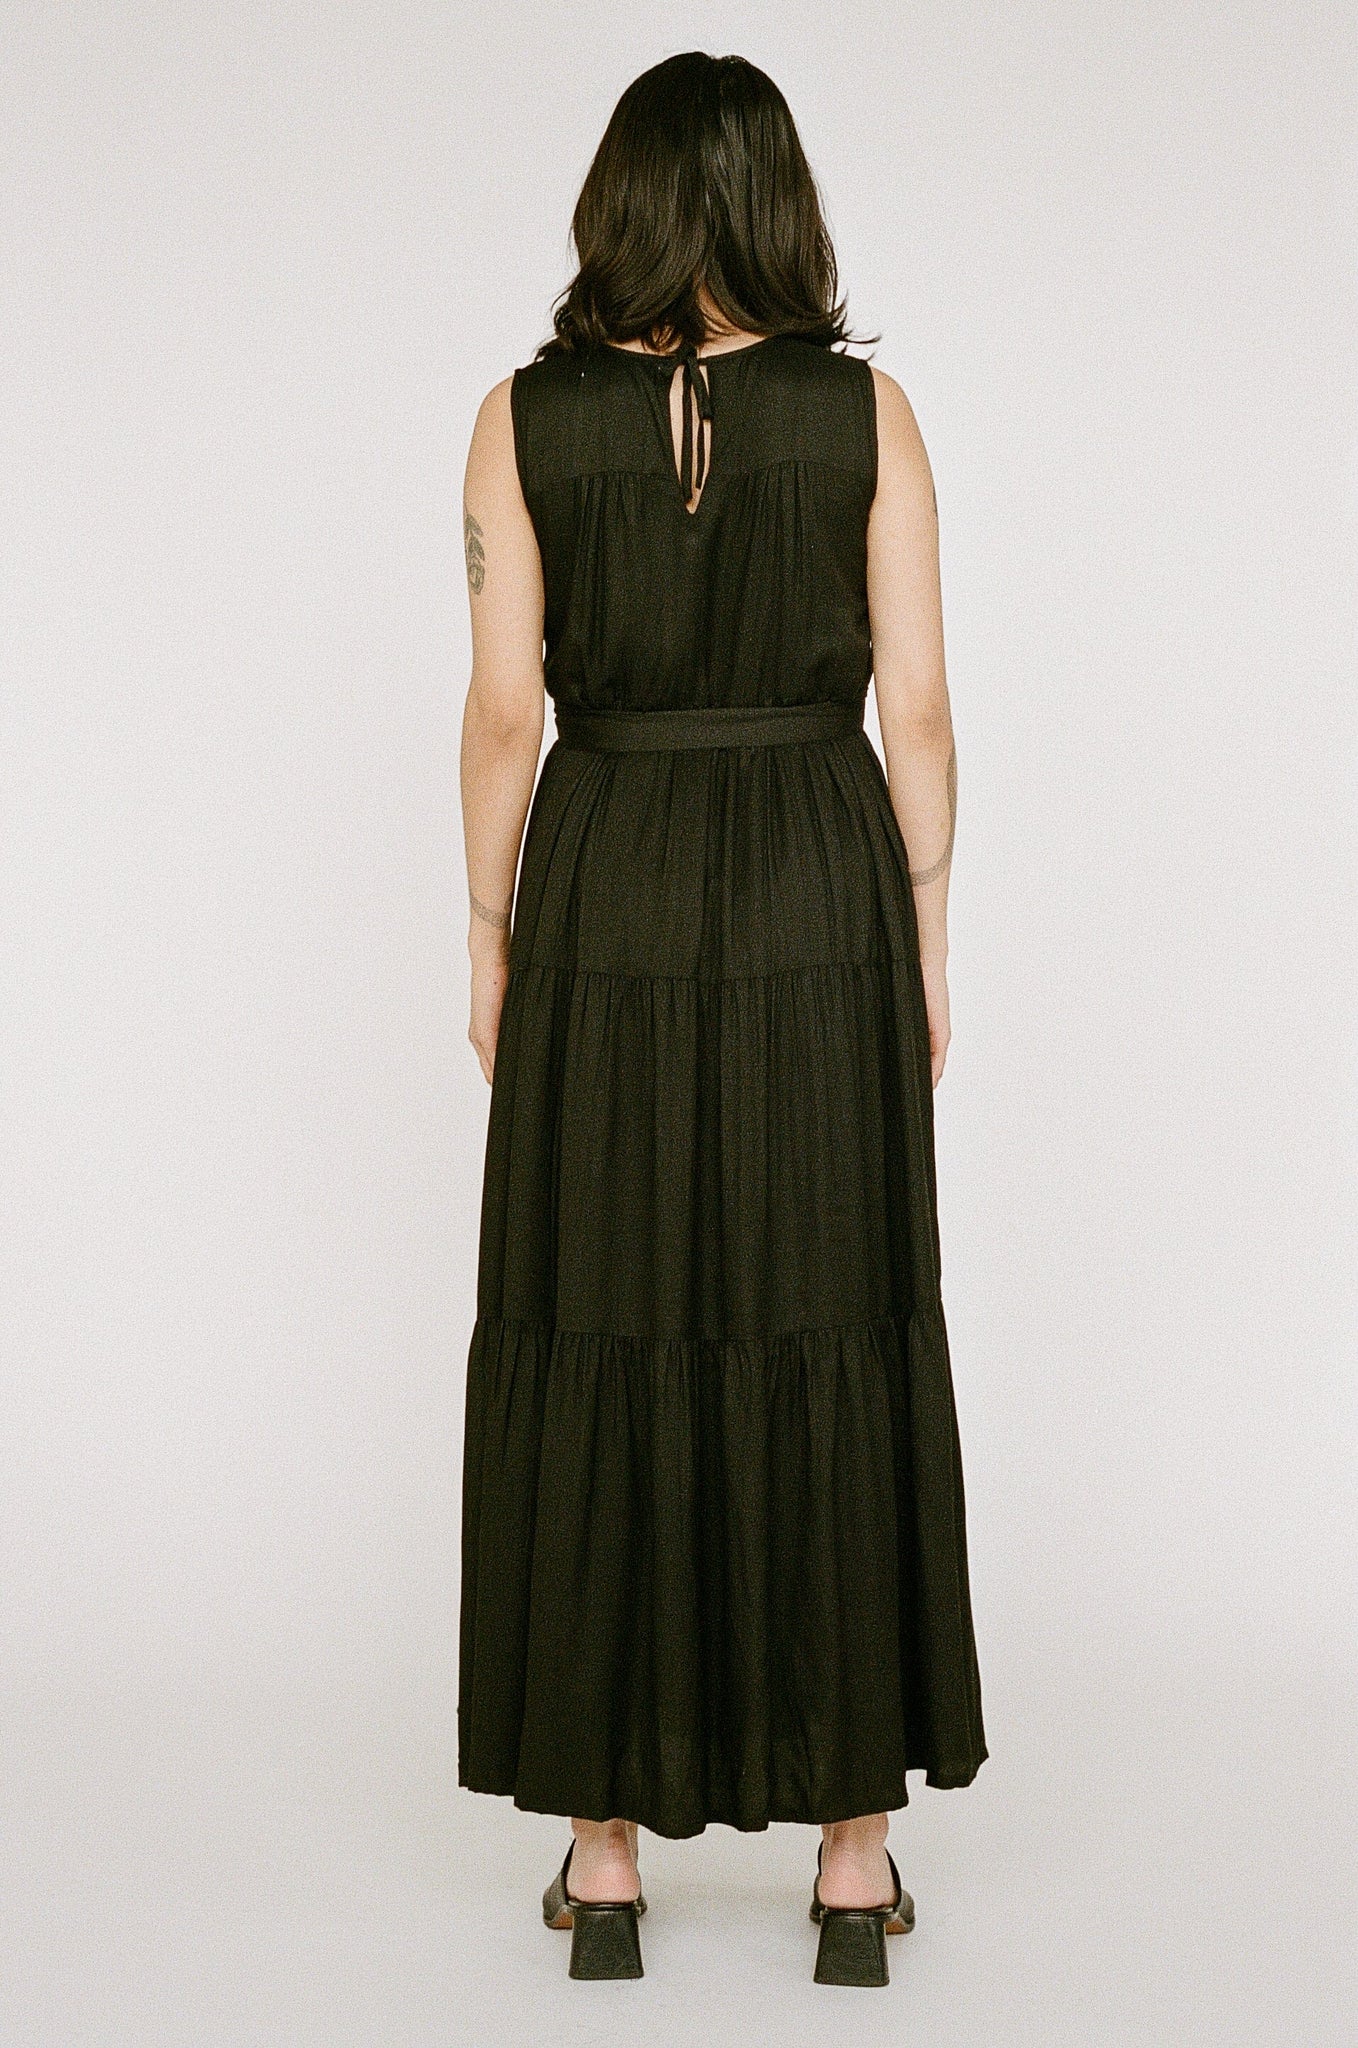 A person stands with their back to the camera, dressed in a Tiered Maxi Dress - Black made from Bemberg Moss Crepe and black heels, against a neutral backdrop.